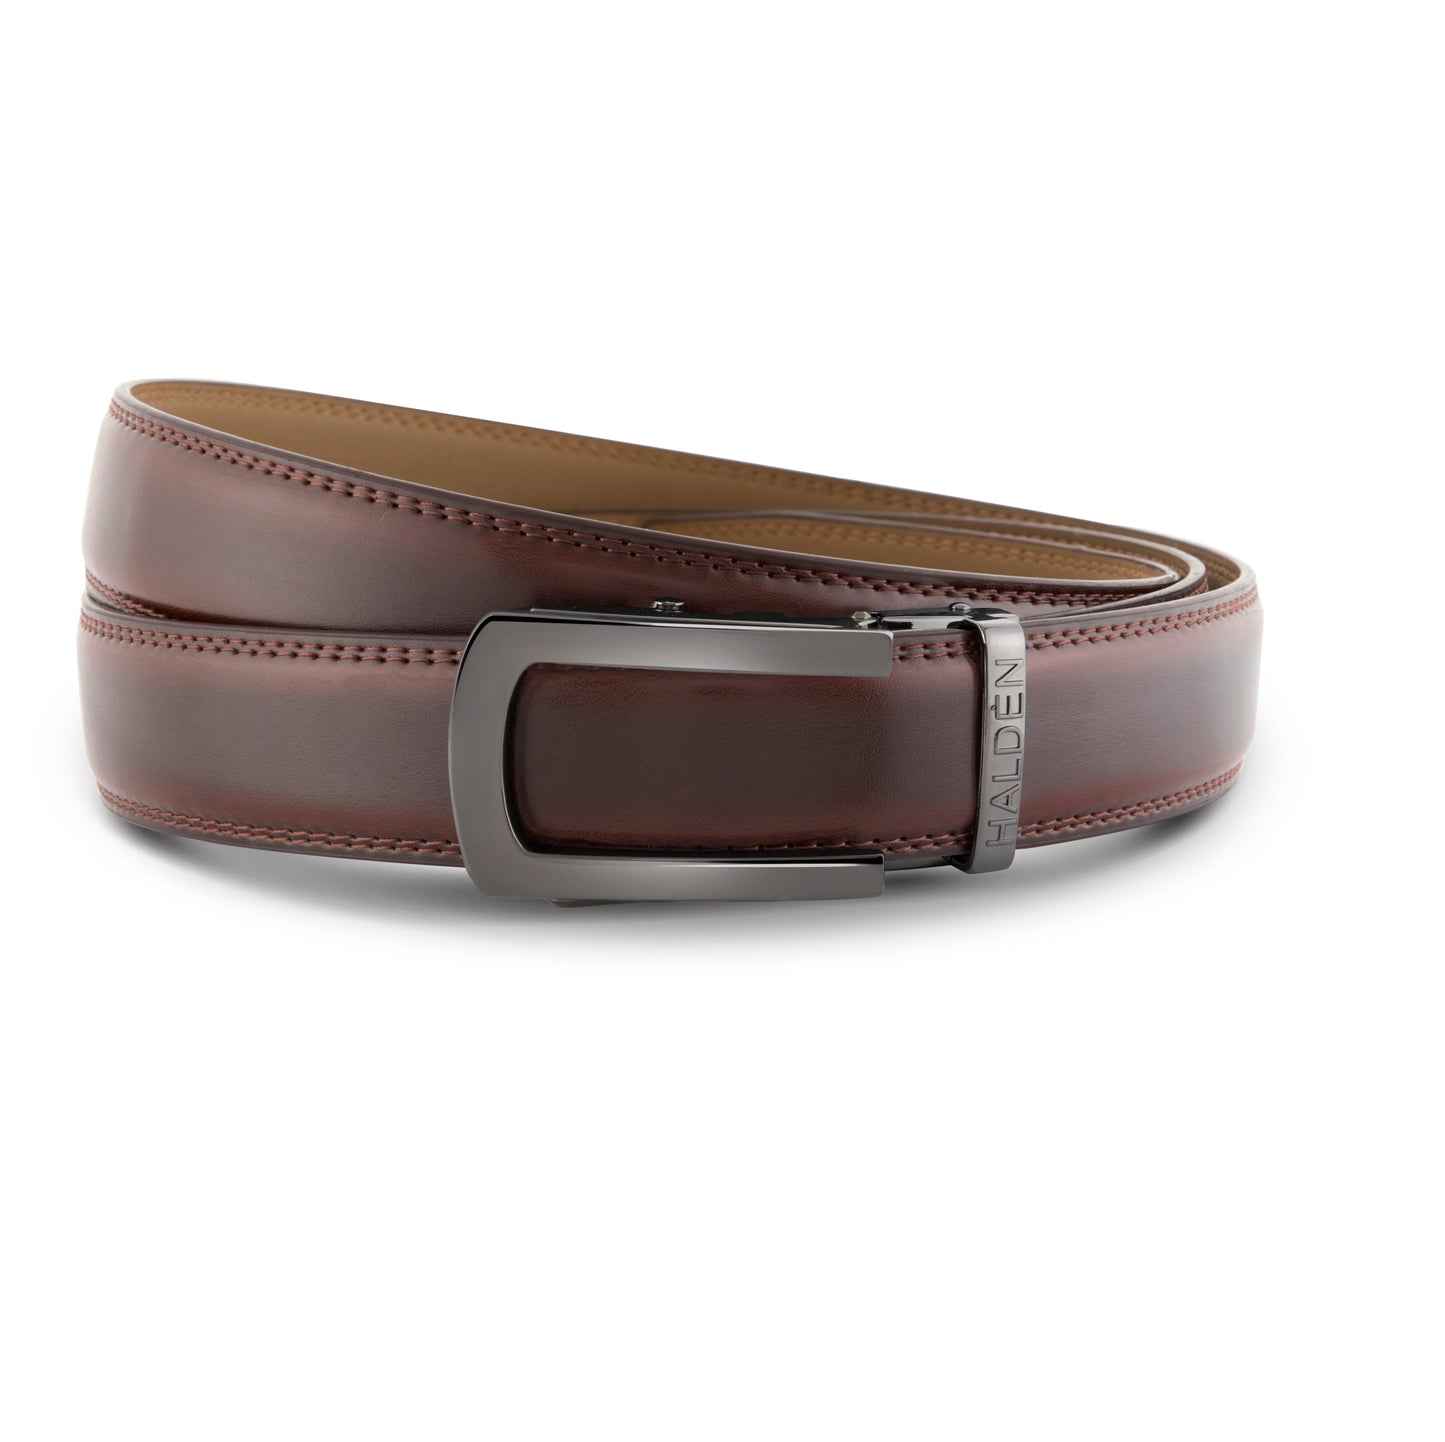 Burley coffee brown with classic buckle